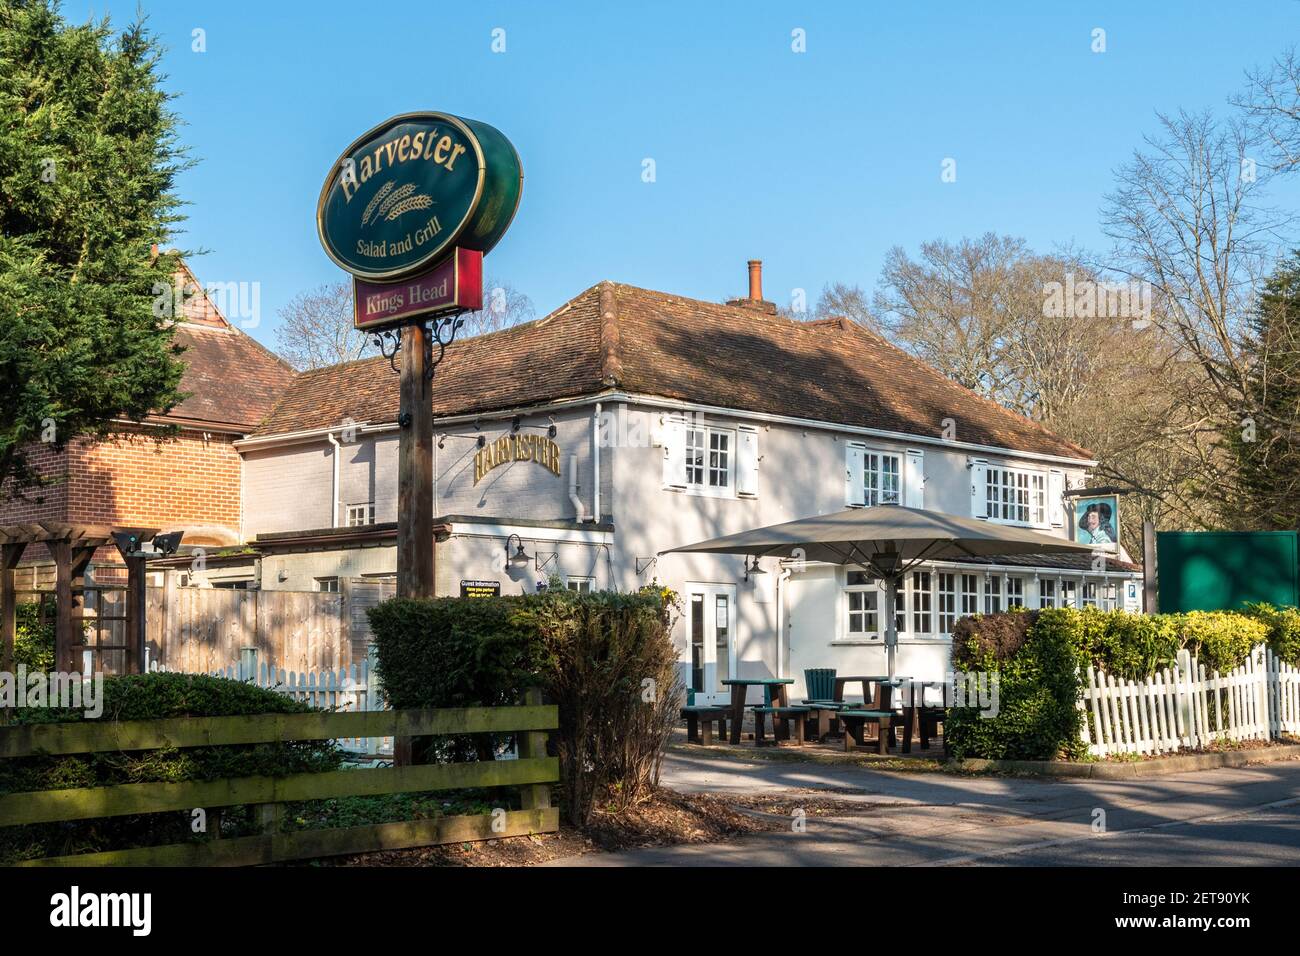 Harvester restaurant at Frimley Green called the King's Head Pub, Surrey, England, UK Stock Photo